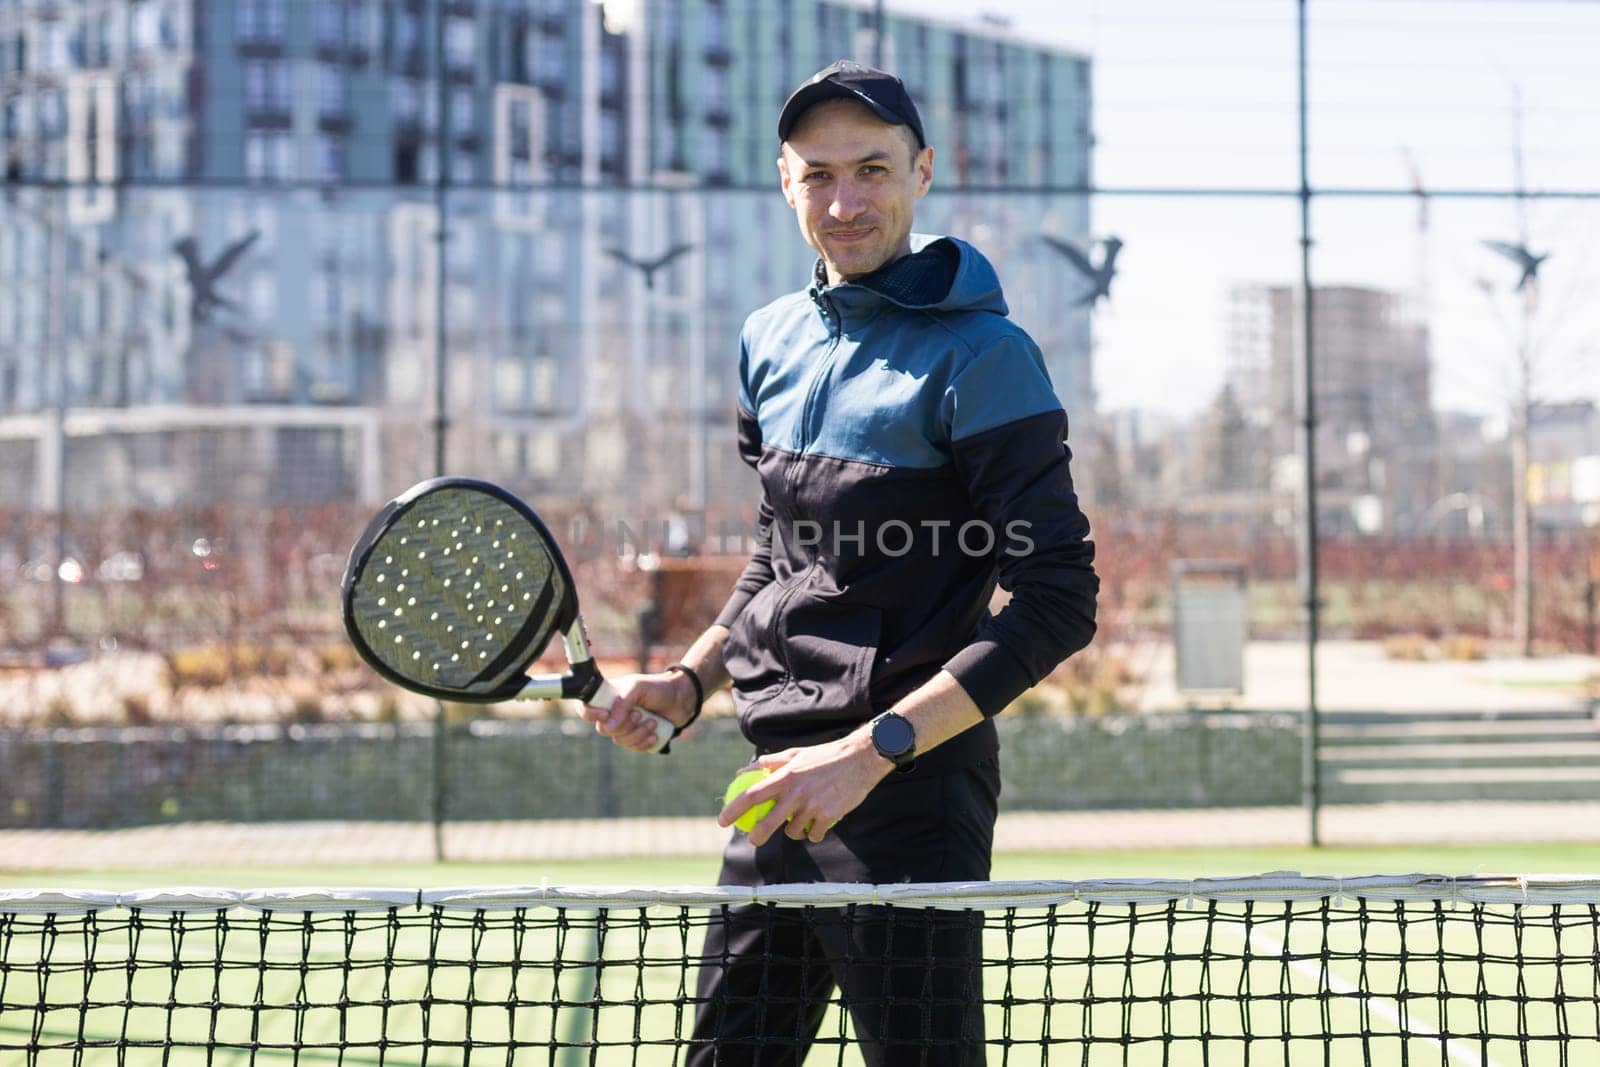 Paddle tennis players ready for match. High quality photo